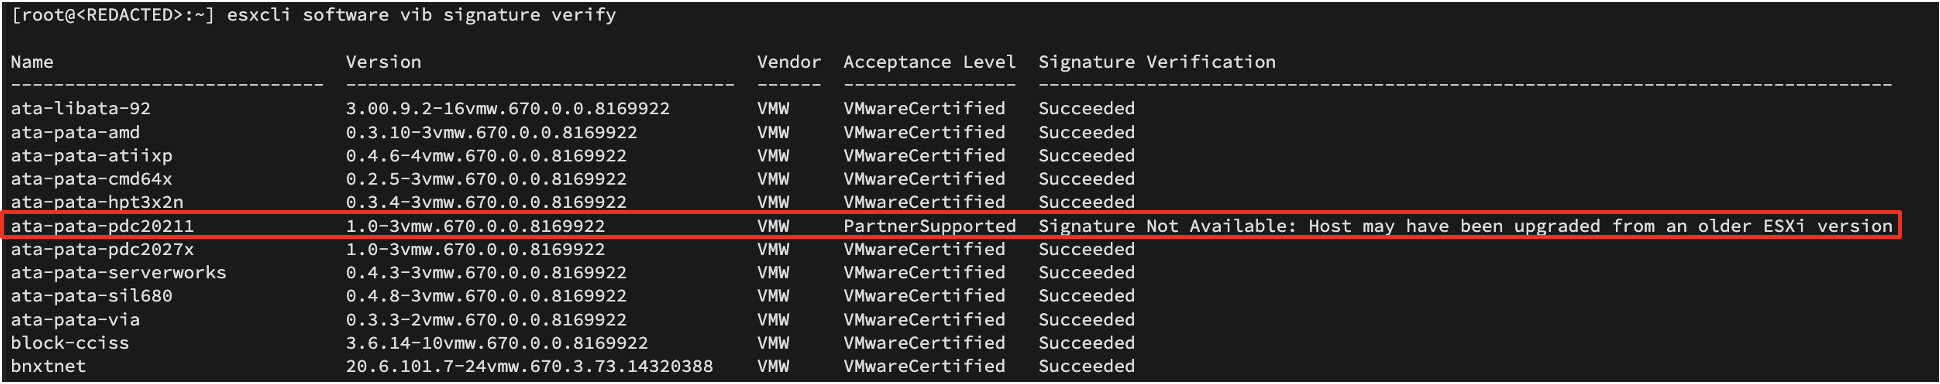 Example of falsified VIB acceptance level being seen in esxcli software vib signature verify